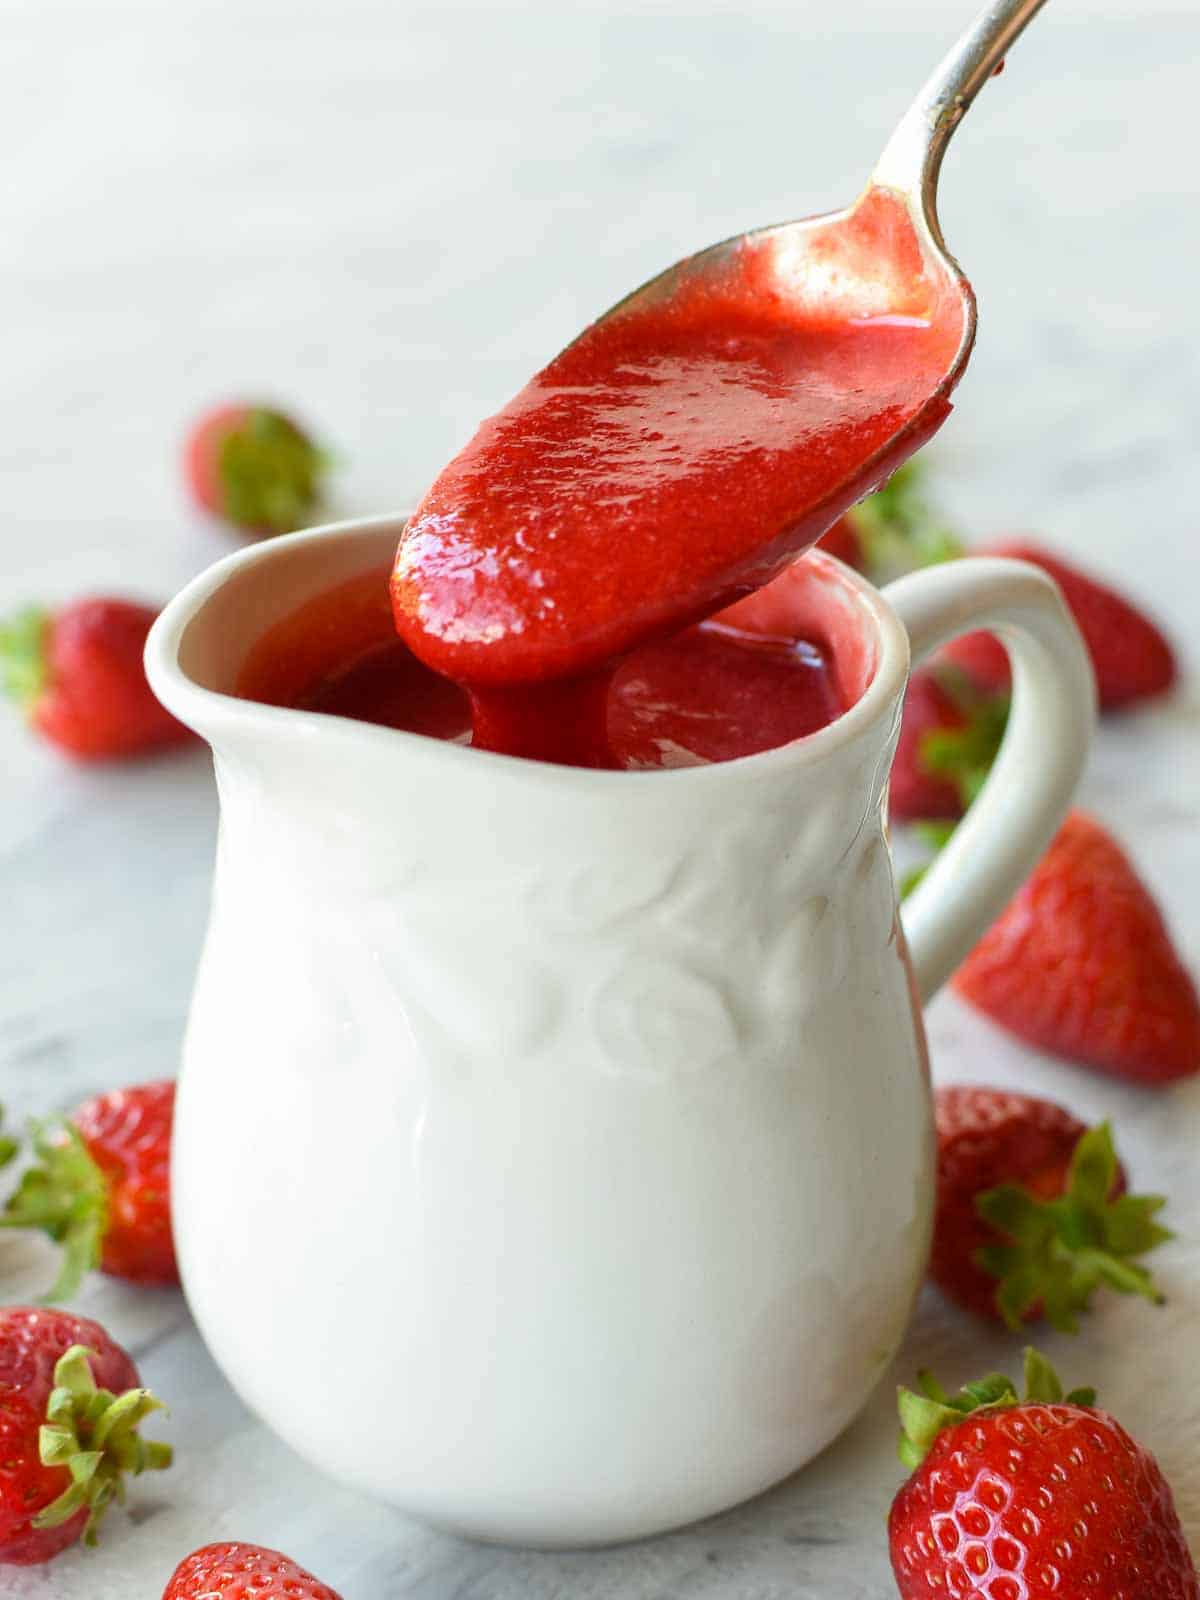 a spoon full of strawberry sauce being poured into a white jug.